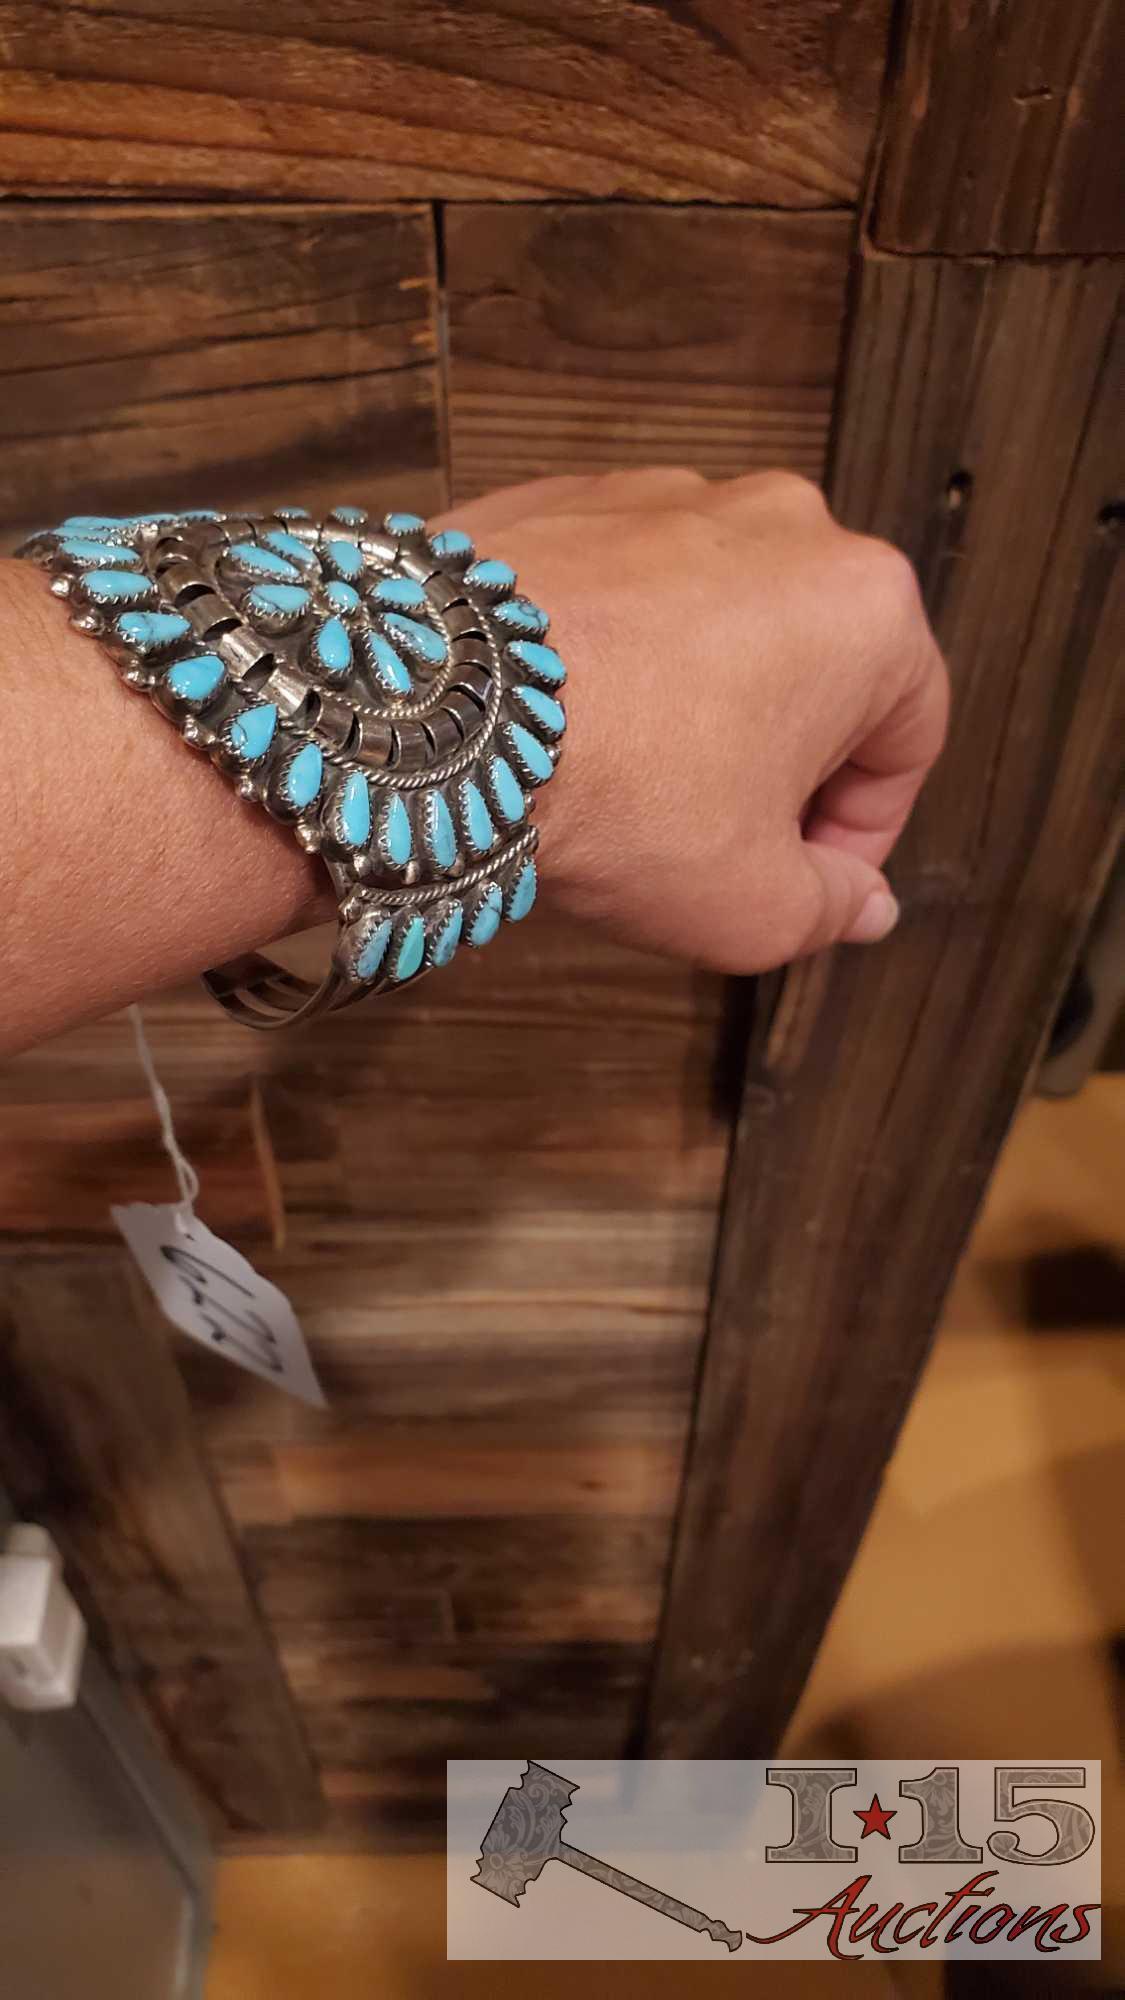 Unique Artist Marked Large Sterling Silver Cuff Bracelet Turquoise Stones